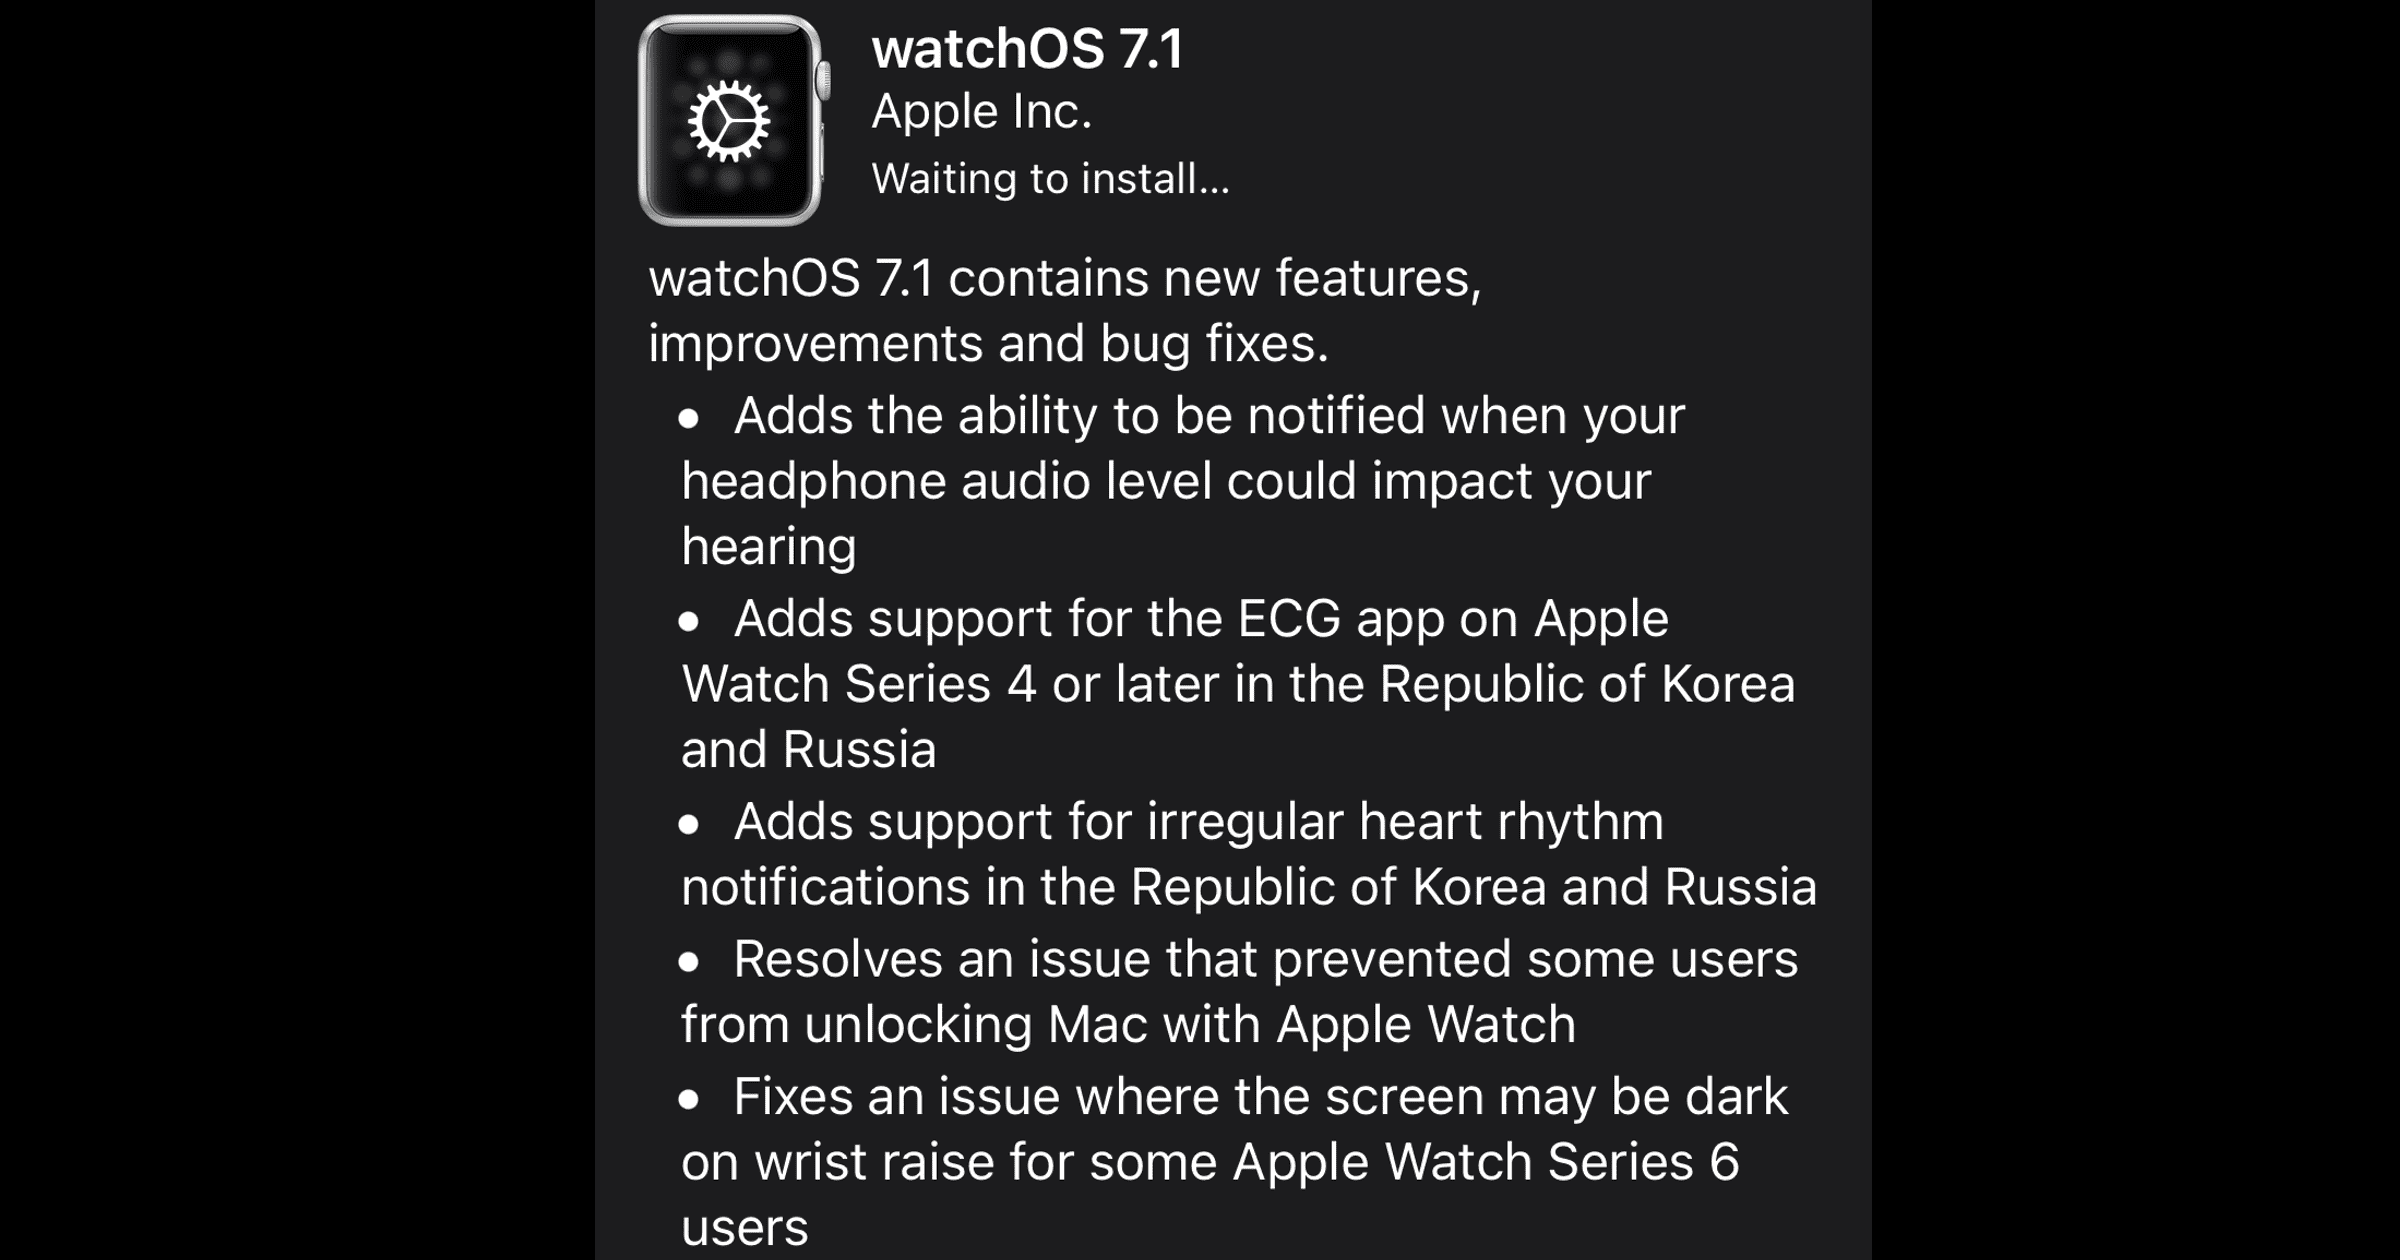 watchOS 7.1 For Apple Watch Now Available